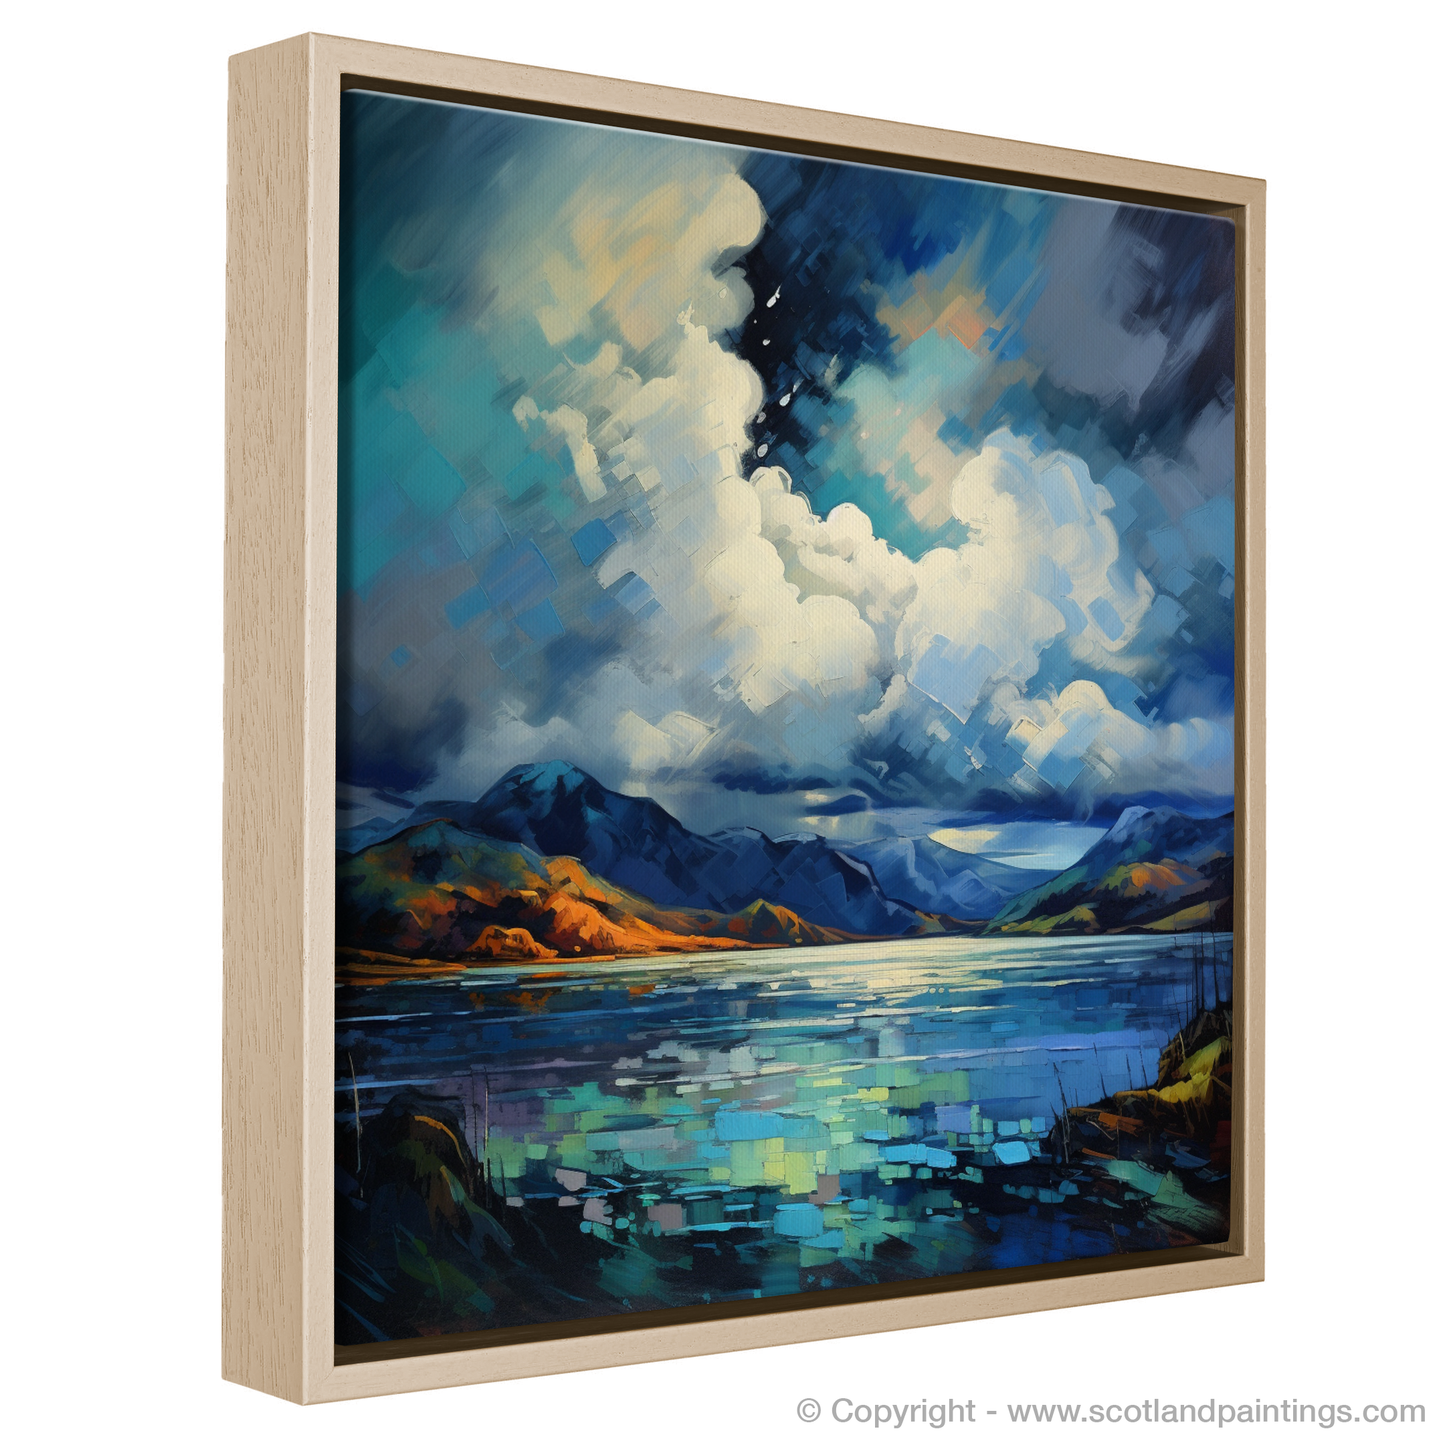 Painting and Art Print of Storm clouds above Loch Lomond entitled "Storm Cloud Majesty over Loch Lomond".